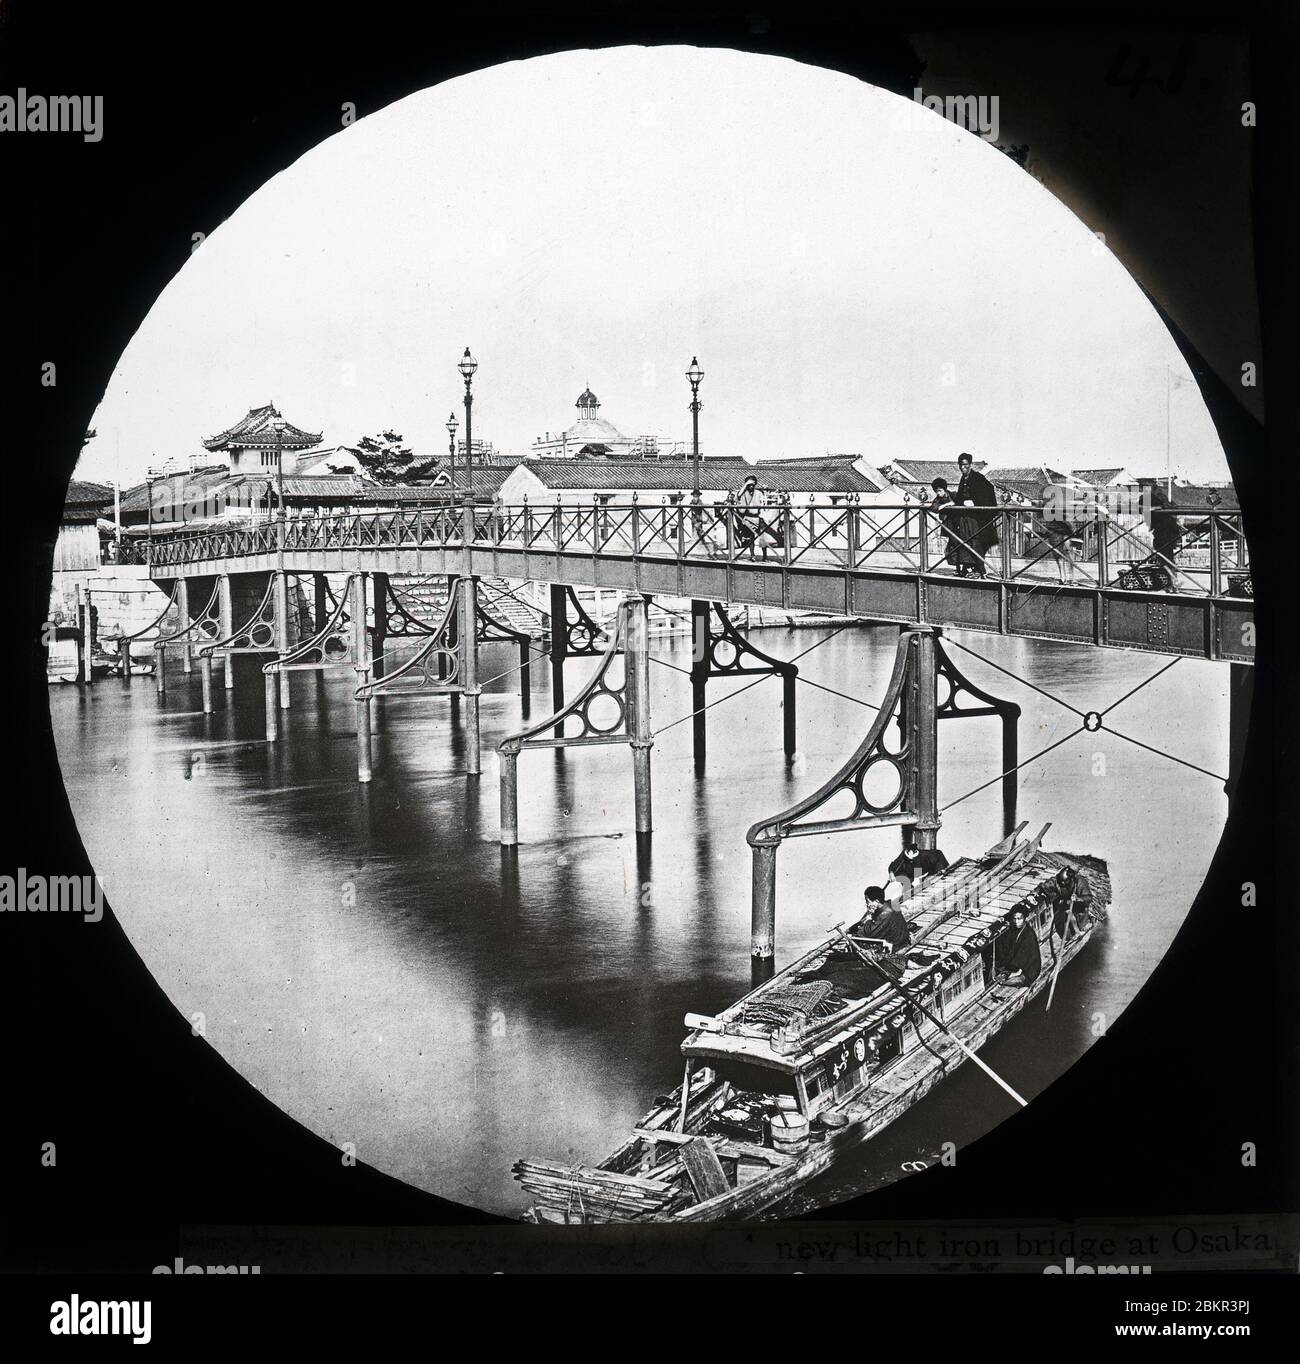 [ 1870s Japan - First Iron Bridge in Osaka ] —   Koraibashi Bridge (高麗橋) over the Higashiyokobori River in Osaka.  In 1870 (Meiji 3), the original wooden bridge was replaced by an iron bridge built by Nagasaki based Alt & Co. It was the first iron bridge in Osaka.  This photograph was taken shortly after the bridge was completed.  In 1929 (Showa 4), the iron bridge was replaced with a concrete structure.  19th century vintage glass slide. Stock Photo